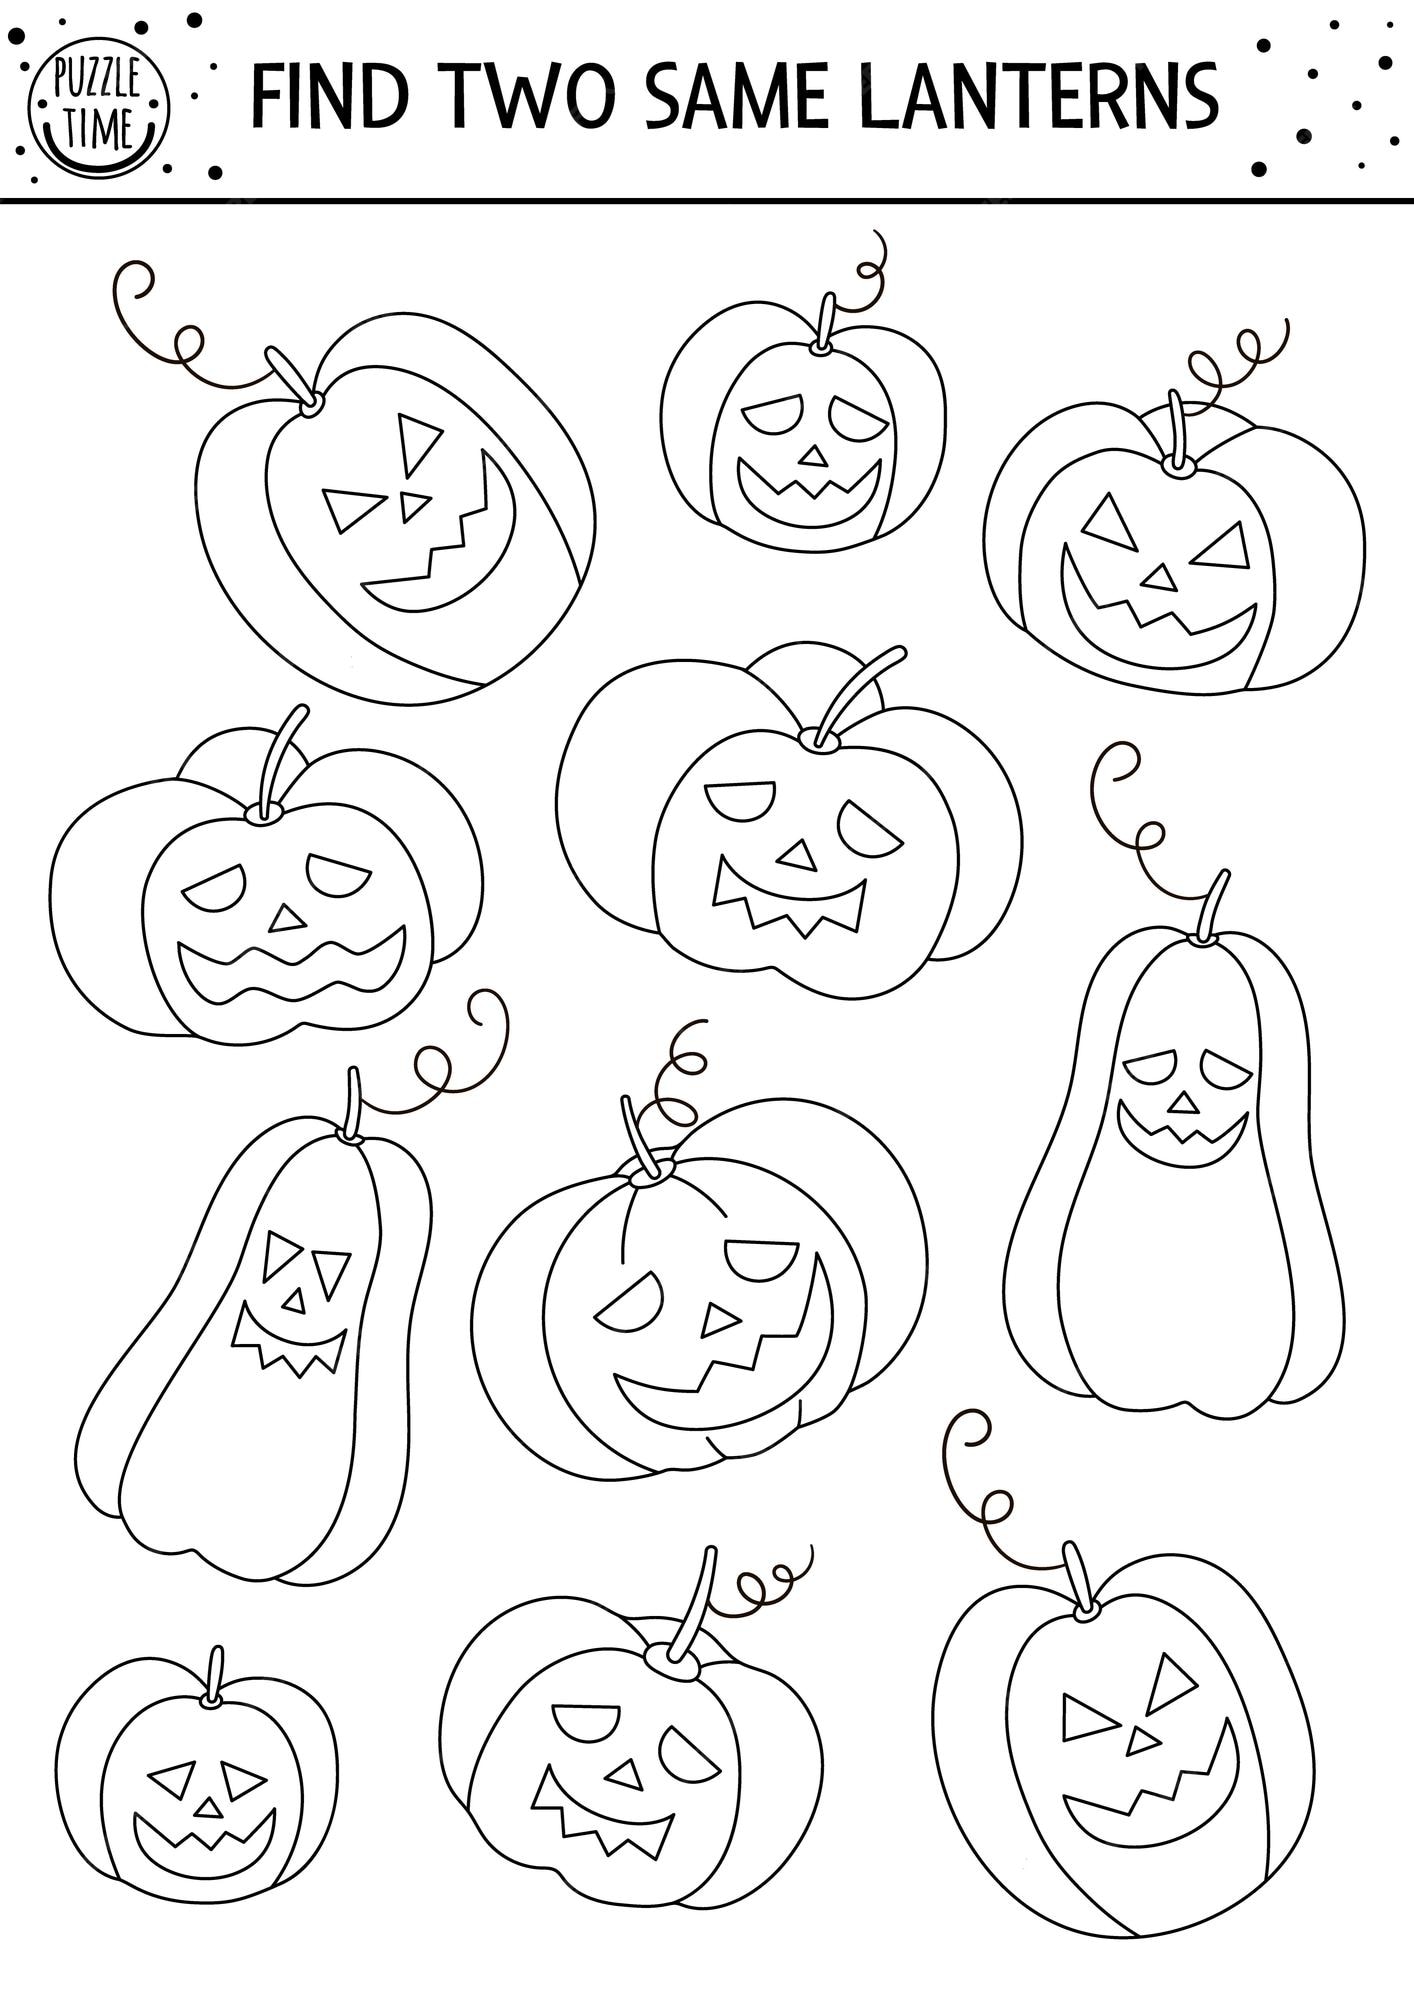 Premium vector find two same jackolanterns black and white halloween matching activity funny outline autumn quiz worksheet or coloring page for kids simple printable game with pumpkin lanternsxa